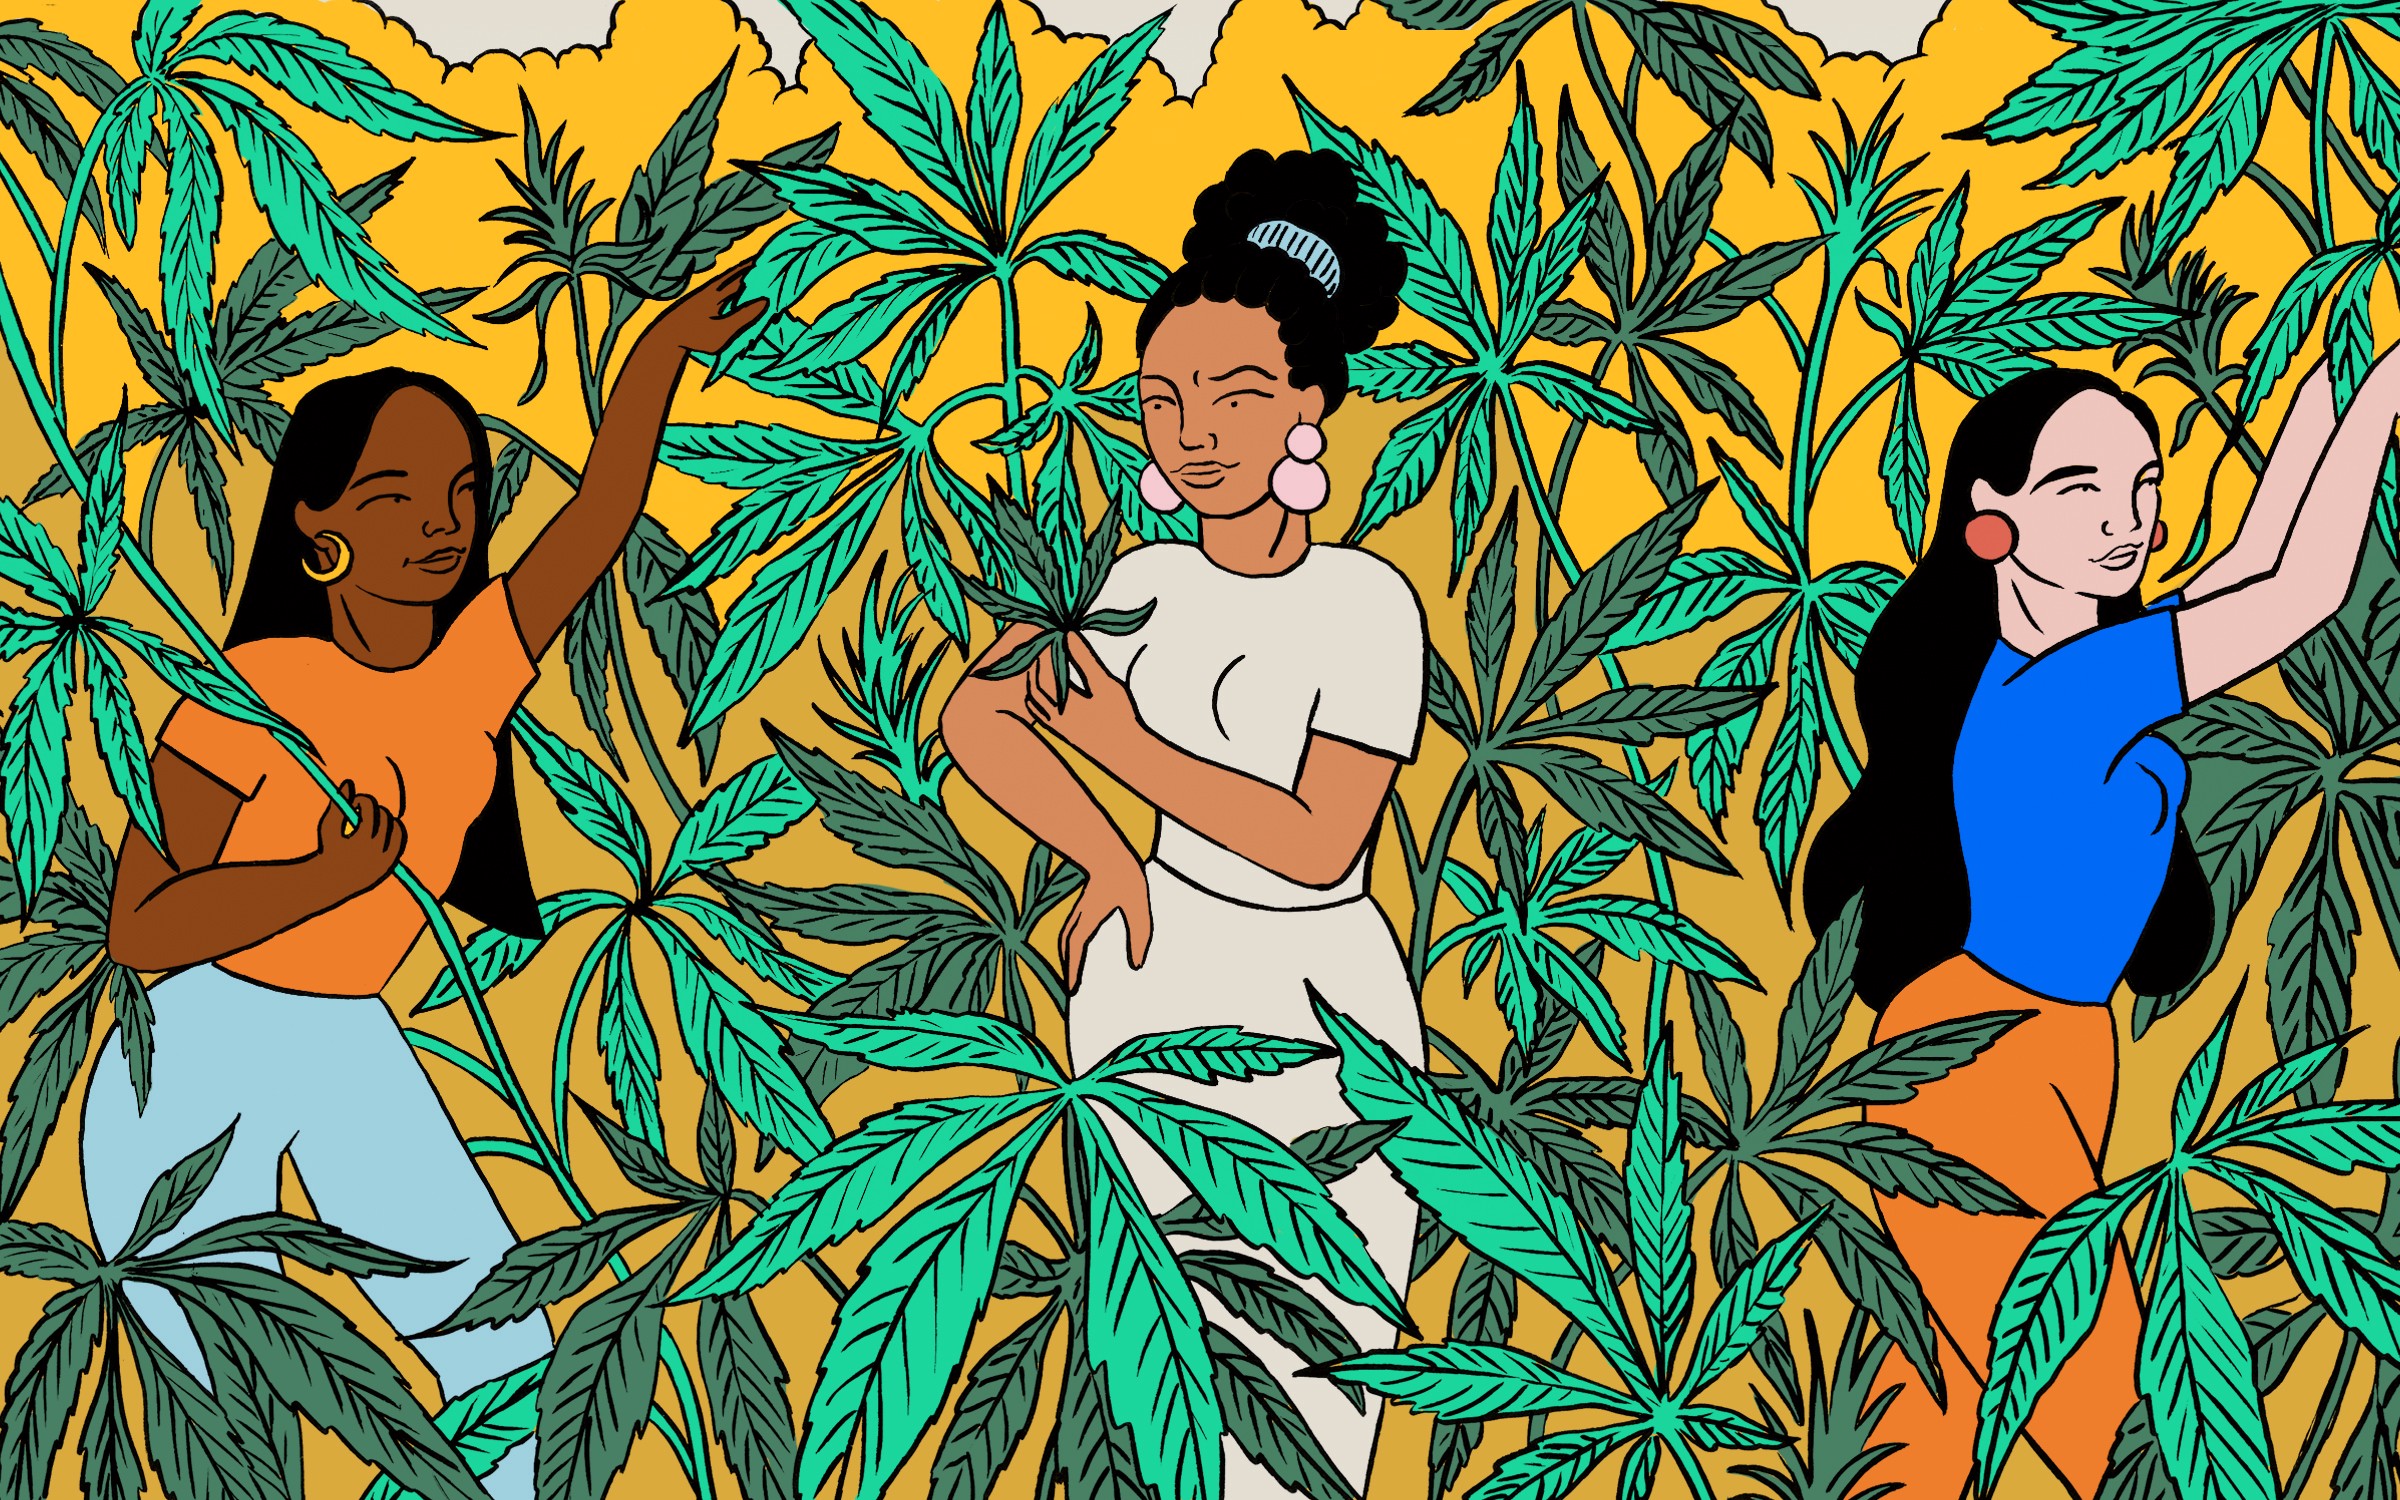 An illustration of three women surrounded by the cannabis plant all around them.